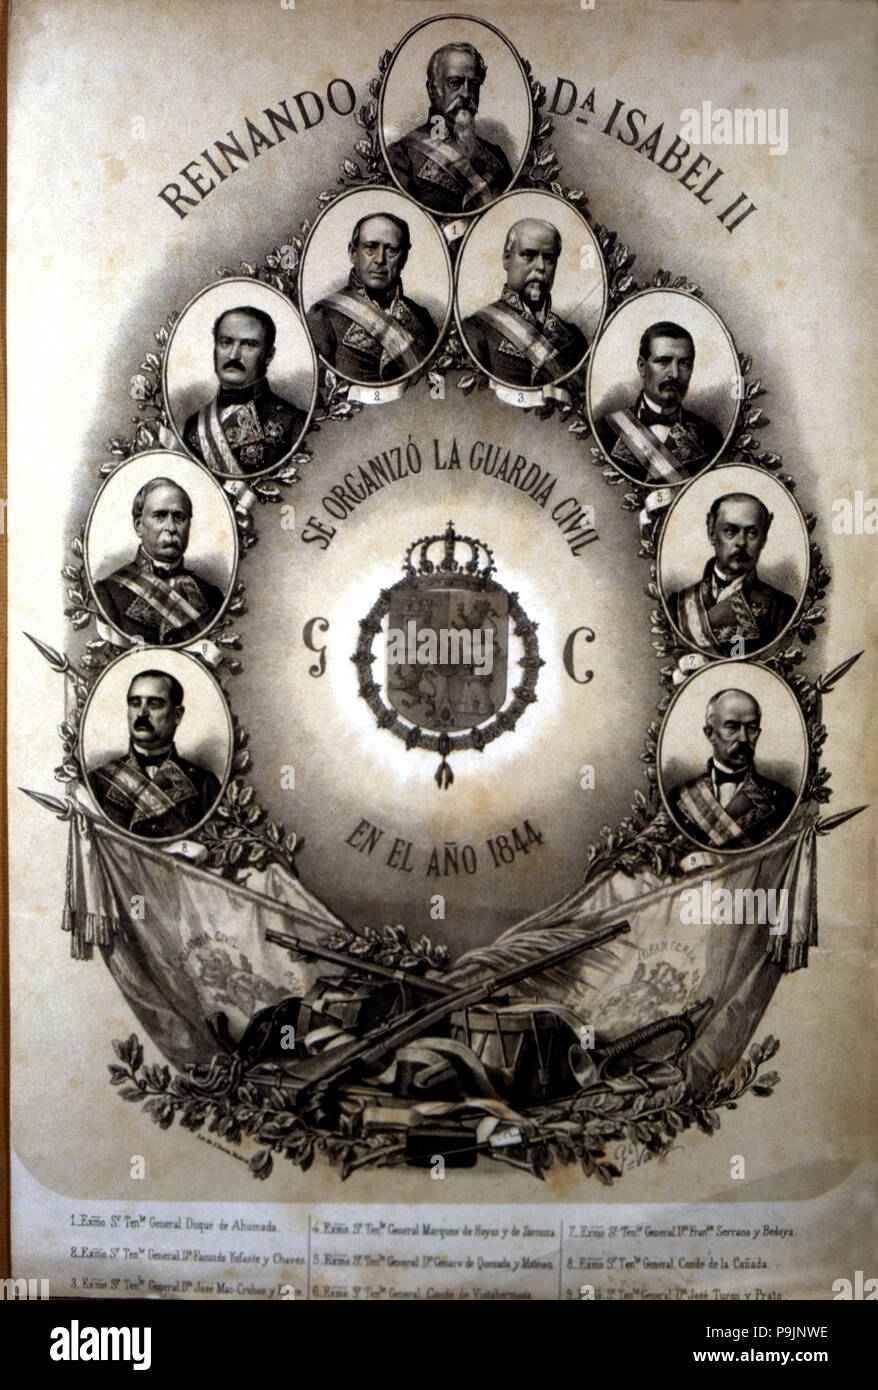 Foundation of the Civil Guard in 1844, portraits of the founders chaired by the Marquis of Ahumad… Stock Photo